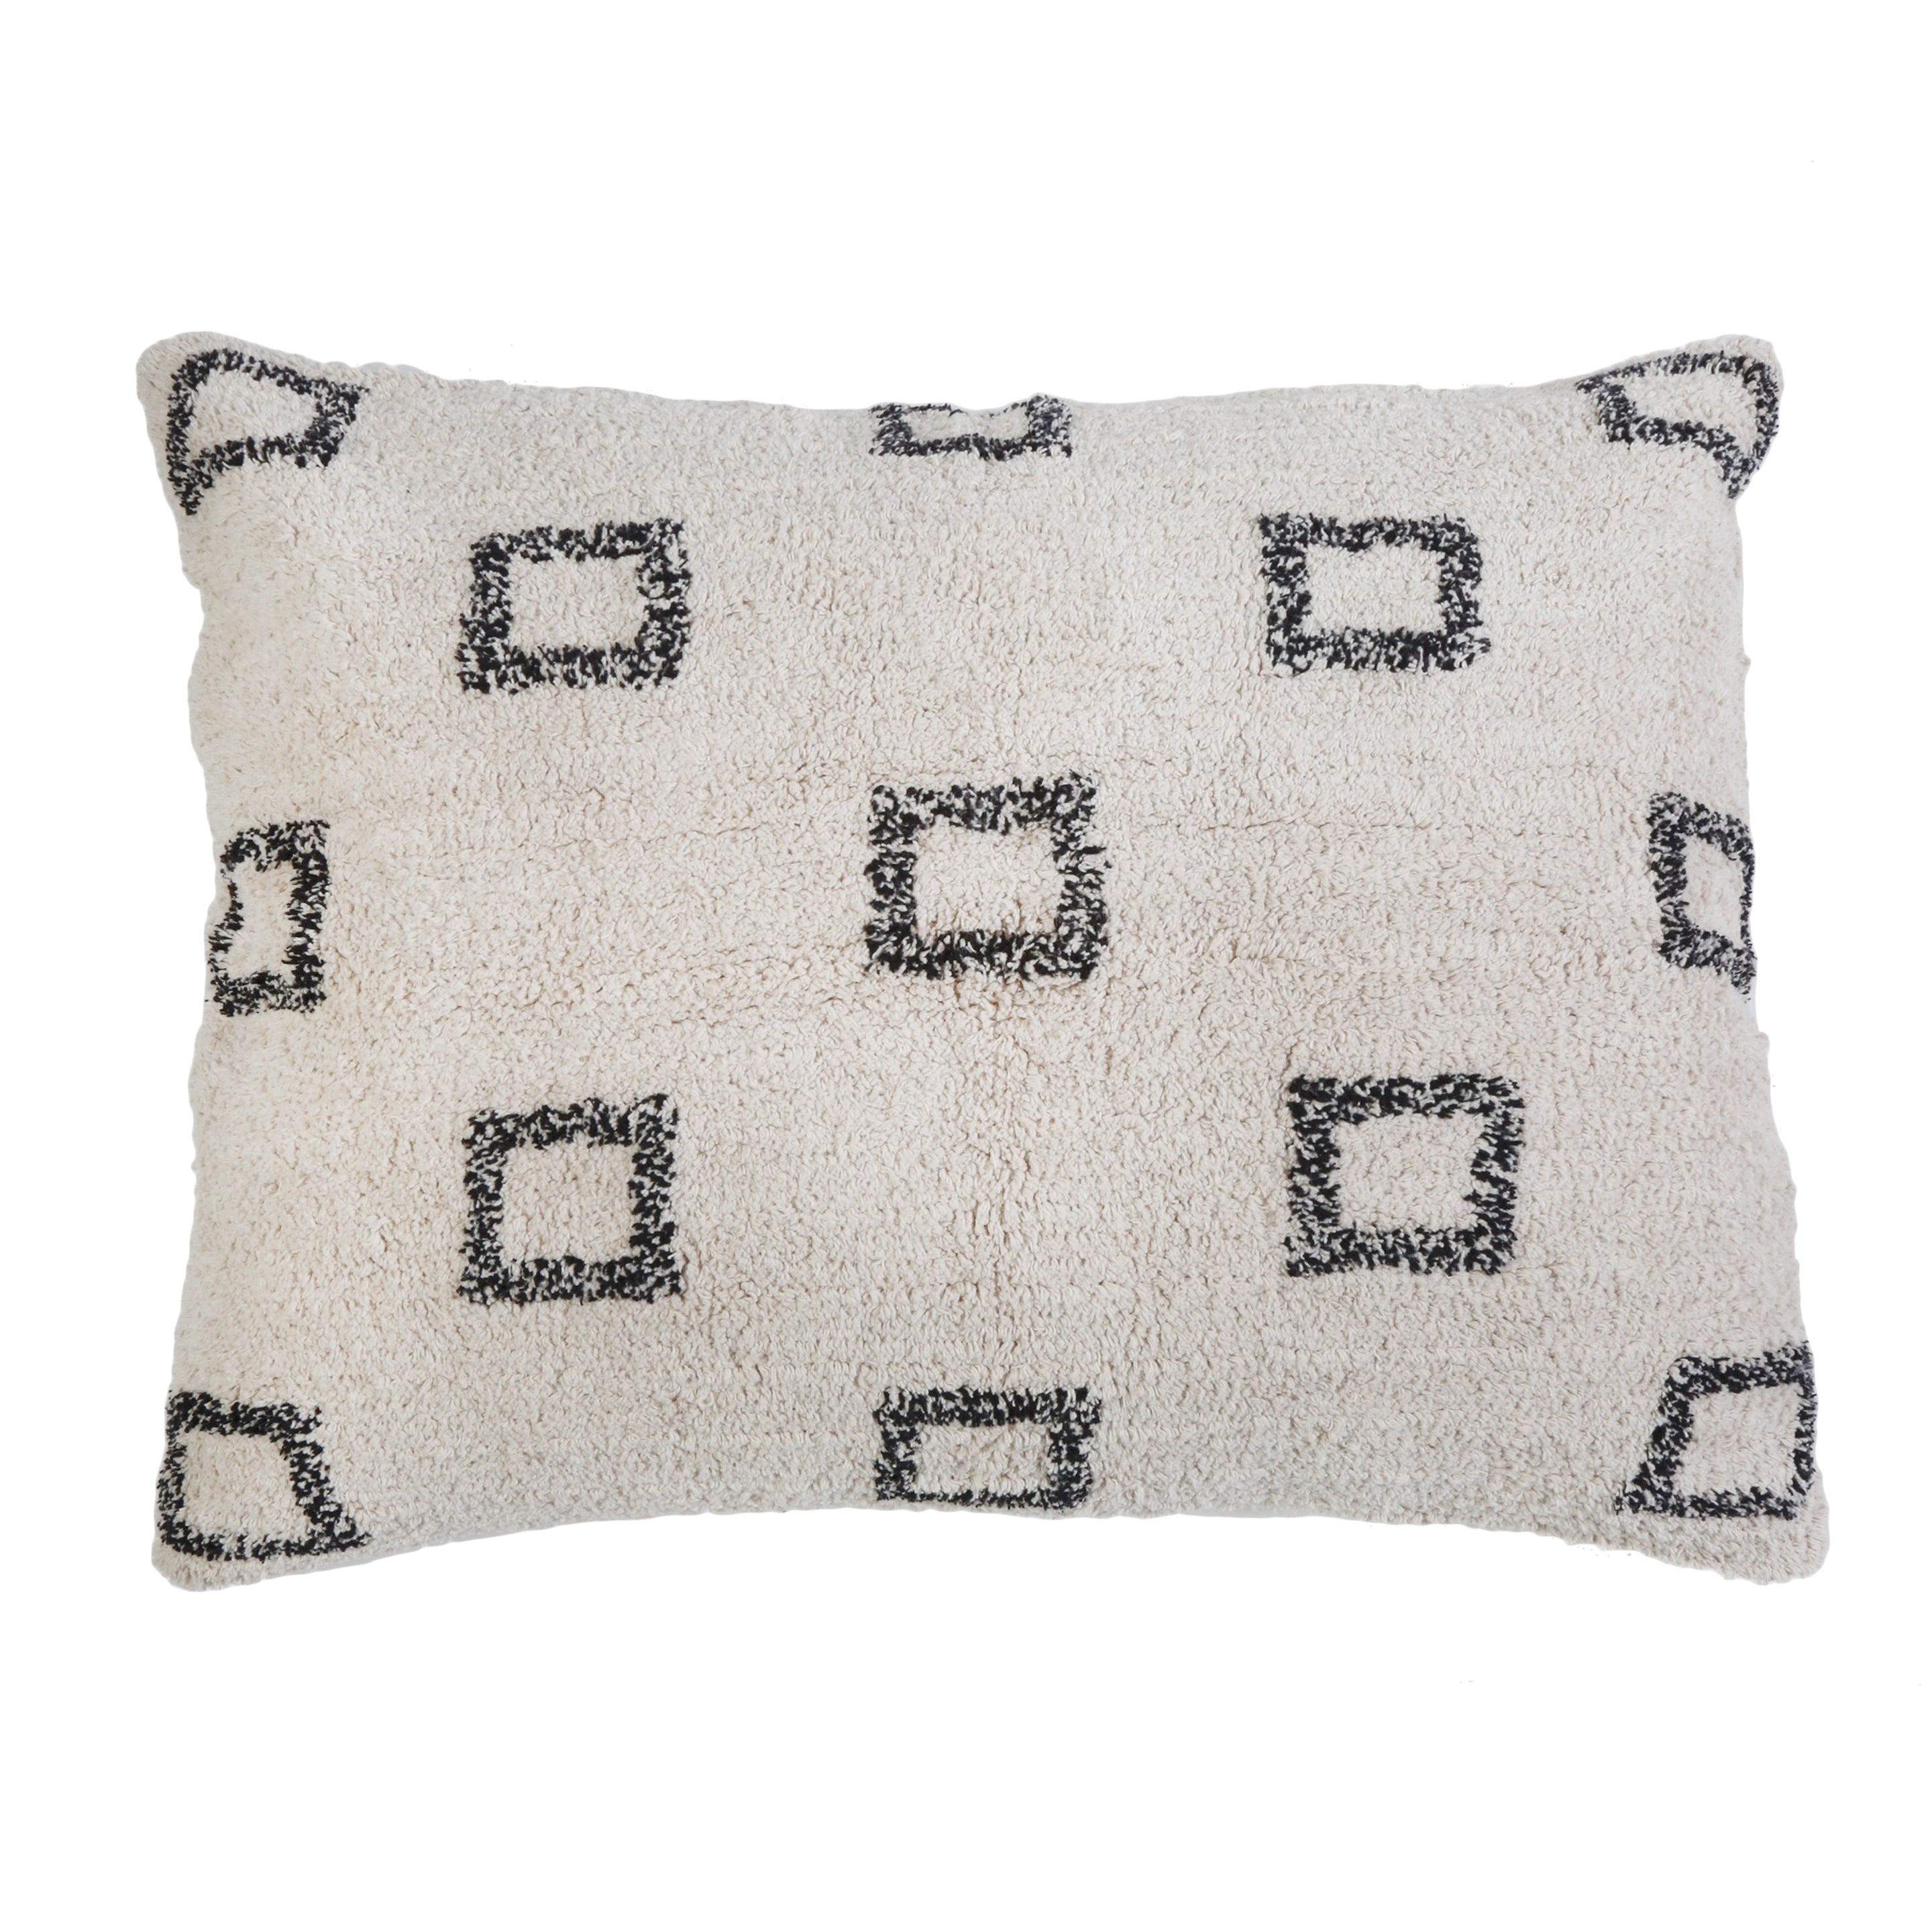 Bowie Hand Woven Big Pillow With Insert Pom At Home